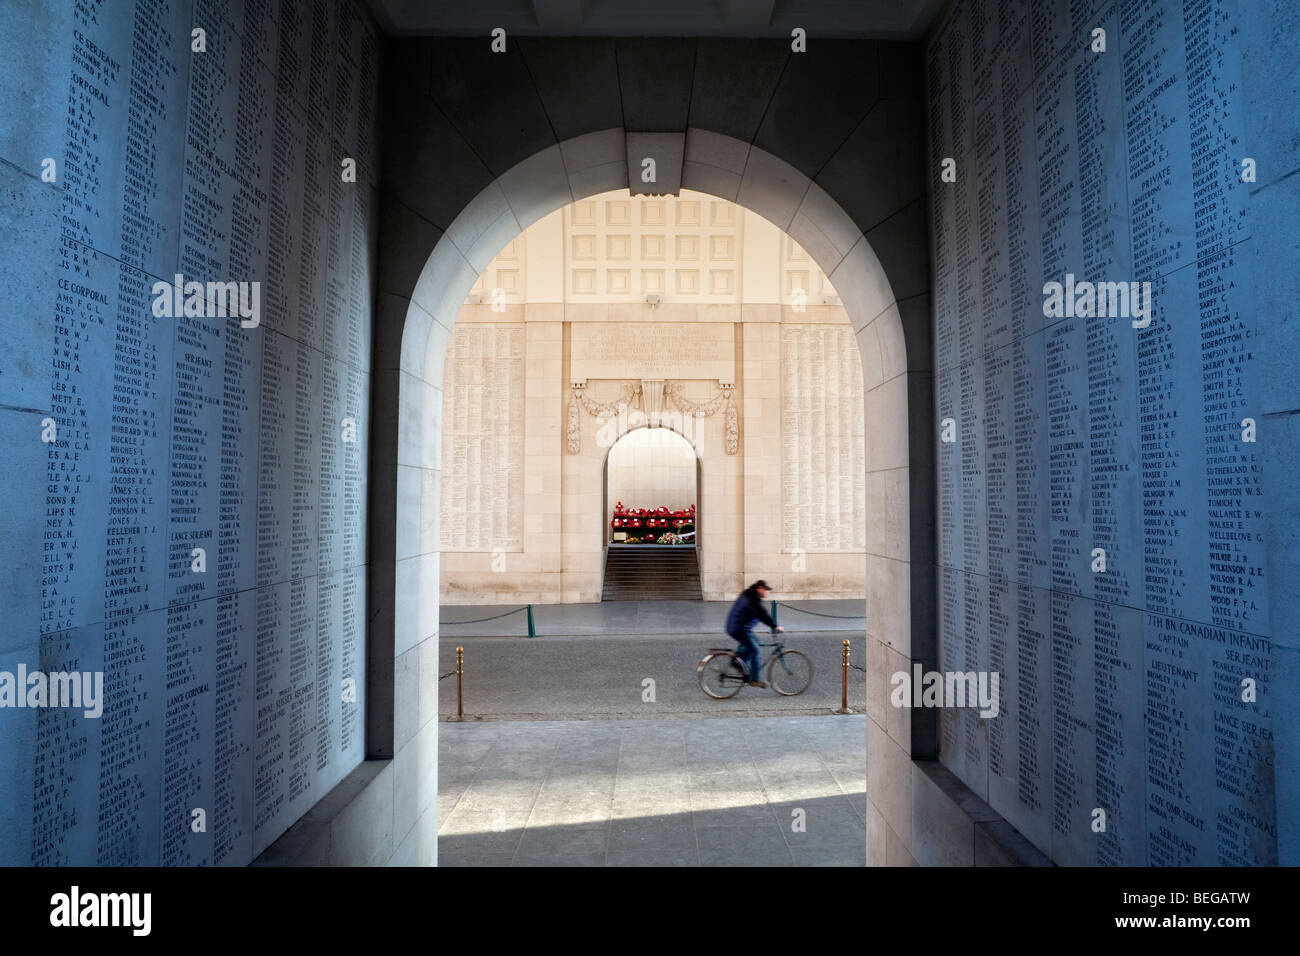 Menin Memorial Gate in Ypres, containing names of 54,896 Britons who died in World War 1 battles and with no known grave. Stock Photo